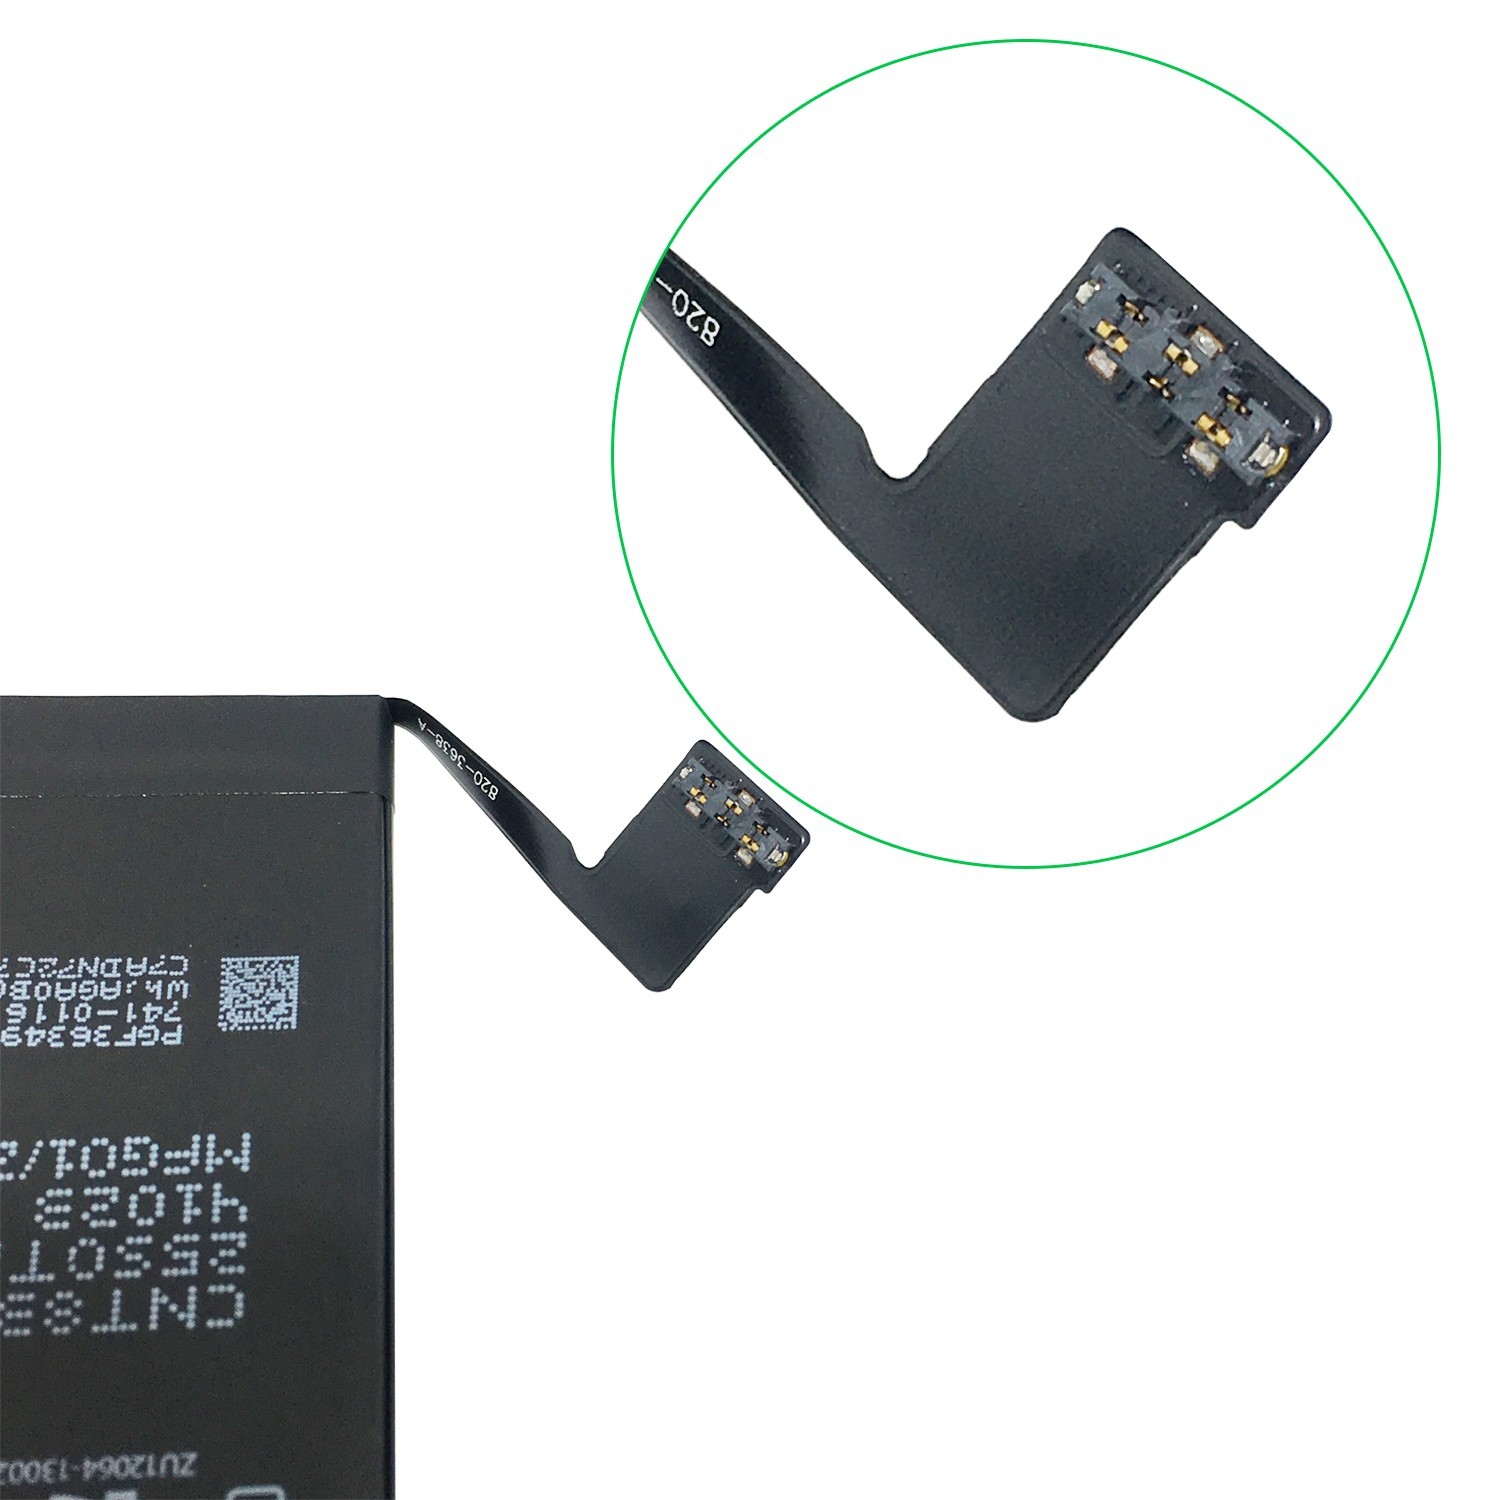 Original Capacity Phone Battery with nice price for iphone 5s